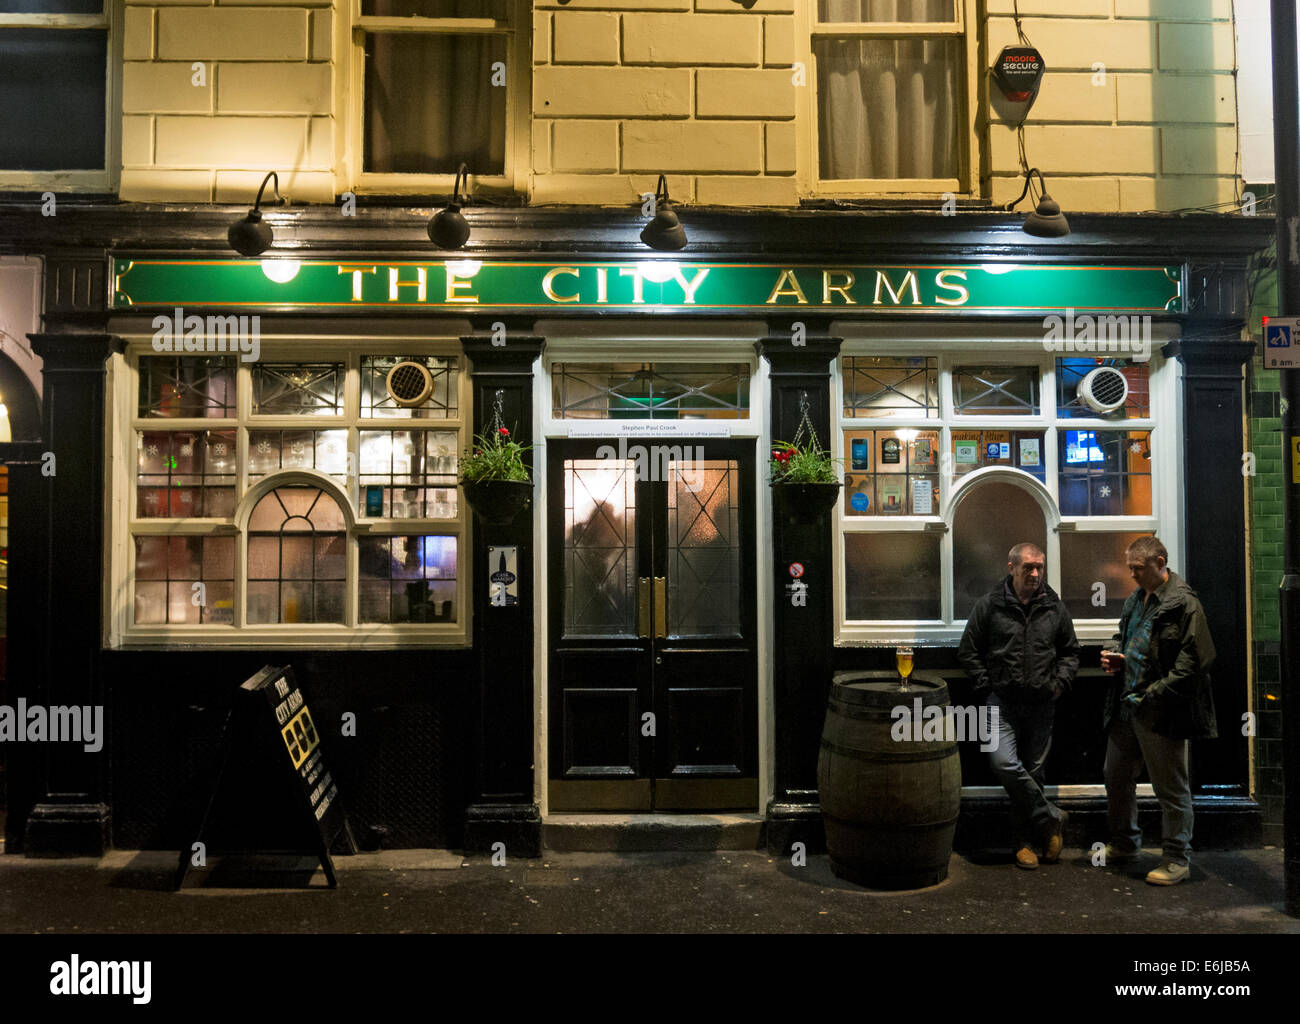 The City Arms Pub, Manchester, NW England, United Kingdom in the early evening Stock Photo